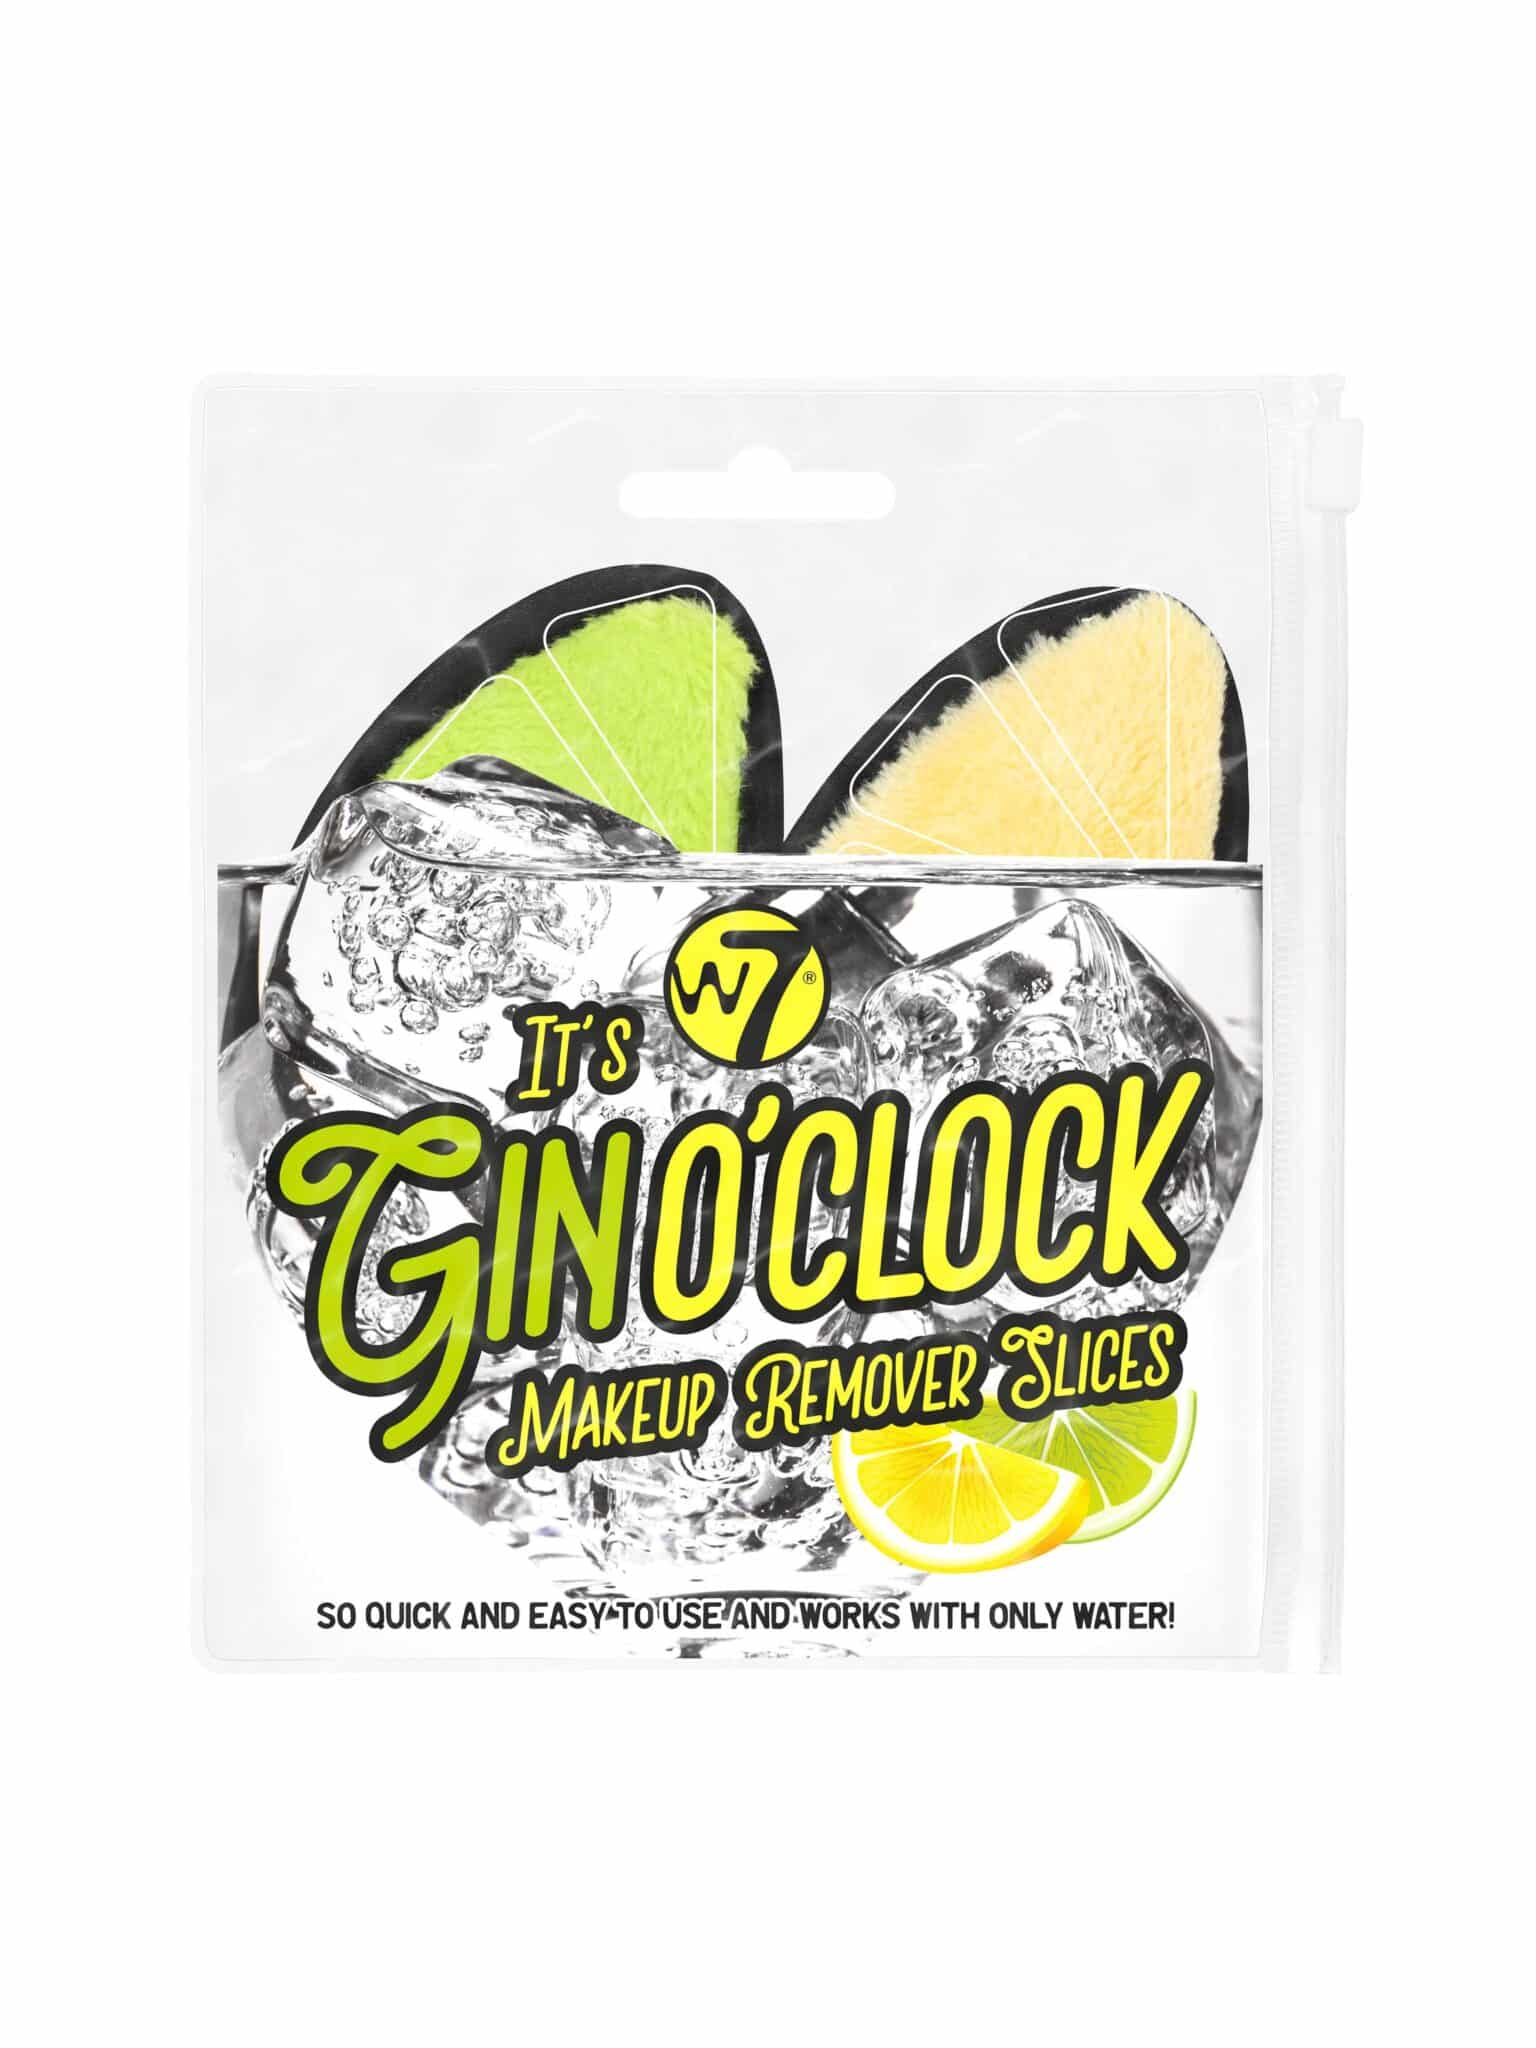 W7 it's gin o'clock makeup remover slices